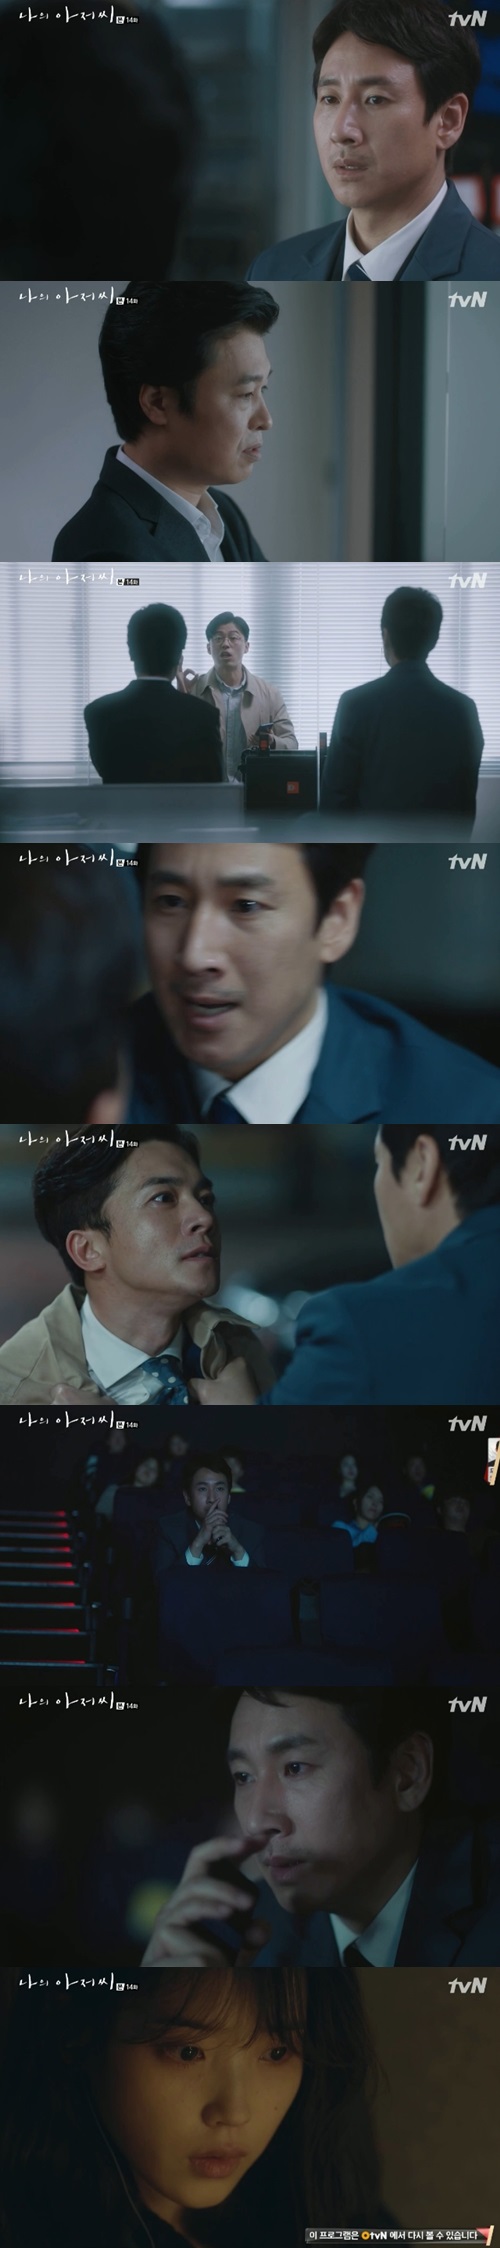 Lee Sun Gyun knew IUs Wiretapping and spoke directly.Park Dong-hoon (Lee Sun Gyun) knew Lee Ji-ans Wiretapping in the 14th episode of TVNs tree drama My Uncle, which aired on May 10 (played by Park Hae-young/directed by Kim One-seok).Park Dong-hoon went home when Ijian missed work but did not meet.The devastated Park Dong-hoon visited Elf Princess Rane (Onara) and Elf Princess Rane said she saw Ijian move out at dawn with a new job.Izzian called Park Dong-hoon and said, It was the first time. Someone whod been good four times. Someone like me. Someone I liked.Do Joon-young (Kim Young-min) was nervous that the police investigating the dismissal of Park Dong-hoon (Jung Hae-gyun) would catch Ijian first when Ijian disappeared and all the data was gone.When Ijian, who had also noticed Jang, quit his job, he said, Did you make the gears go away? Why did the Ones bother you? Bring them right away.Ijian visited Do Jun-young and said, I will not tell you about the affair. Lets just try to sort out those who are disturbed by the re-election of the CEO.Do Jun-young said, Do you hate to scratch Park Dong-hoon? You love him enthusiastically.I will just be disgraced. I said, I killed once, but I can not kill twice. Lee Kwang-il (Jang Ki-yong), who intercepted the data of Ijian at the same time, knew all the situations through Wiretapping files.Jong-soo (Hong In-min) decided to take Do Jun-young off the Blackmail – Cinémix Par Chloé money with the Wiretapping file as bait, but Lee Kwang-il showed a complicated expression when he realized that Ijian genuinely liked Park Dong-hoon.Lee Ji-an started working for a new job and continued Wiretapping Park Dong-hoon with his new cell phone.Park Dong-hoon became managing director.Everyone who knew Park Dong-hoon celebrated Park Dong-hoon, and a local feast took place at Elf Princess Rane.However, Kang Yoon-hee (Lee Ji-ah) left first after seeing his brother Park Ki-hoon (Song Dawn) who knew his affair, and Elf Princess Rane first called Yoon Sang-One, the name of the obsolete (Park Hae-jun), who became taboo because of himself.On the other hand, Hood has locked himself in the room since Elf Princess Rane went to the temple.Park Dong-hoon moved to the executive directors office and wore slippers presented by Lee Ji-an, while Song Ki-beom (played by Ahn Seung-kyun) was arrested while playing a game in the game room.Song said that Park Dong-hoon was drunk and told him that he had Dong-hoon, Sokcho to go to the agency.Park Dong-hoon met Park Dong-hoon with a strange feeling when Ijian number came out of Song Ki-bums cell phone.Park Dong-hoon quietly asked Park Dong-hoon to turn off his cell phone and found a Wiretapping application together.Park Dong-hoon was appalled that my cell phone was Wiretapping.Park Dong-hoon tried to catch Do Jun-youngs Lee Ji-an by using the Wiretapping application without deleting it.Park Dong-hoon met Do Jun-young with his cell phone in the movie theater and asked, What did you do with Ijian?Do Jun-young said, You picked him up and I got dirty. He got caught cheating. He cut off and took money.Youre gonna take money, youre gonna beat up a traitor, youre gonna eat. Im the only one? You?You guys? Park Dong-hoon and Ijian were involved in an affair, and Park Dong-hoon punched Do Jun-young.Yoo Gyeong-sang